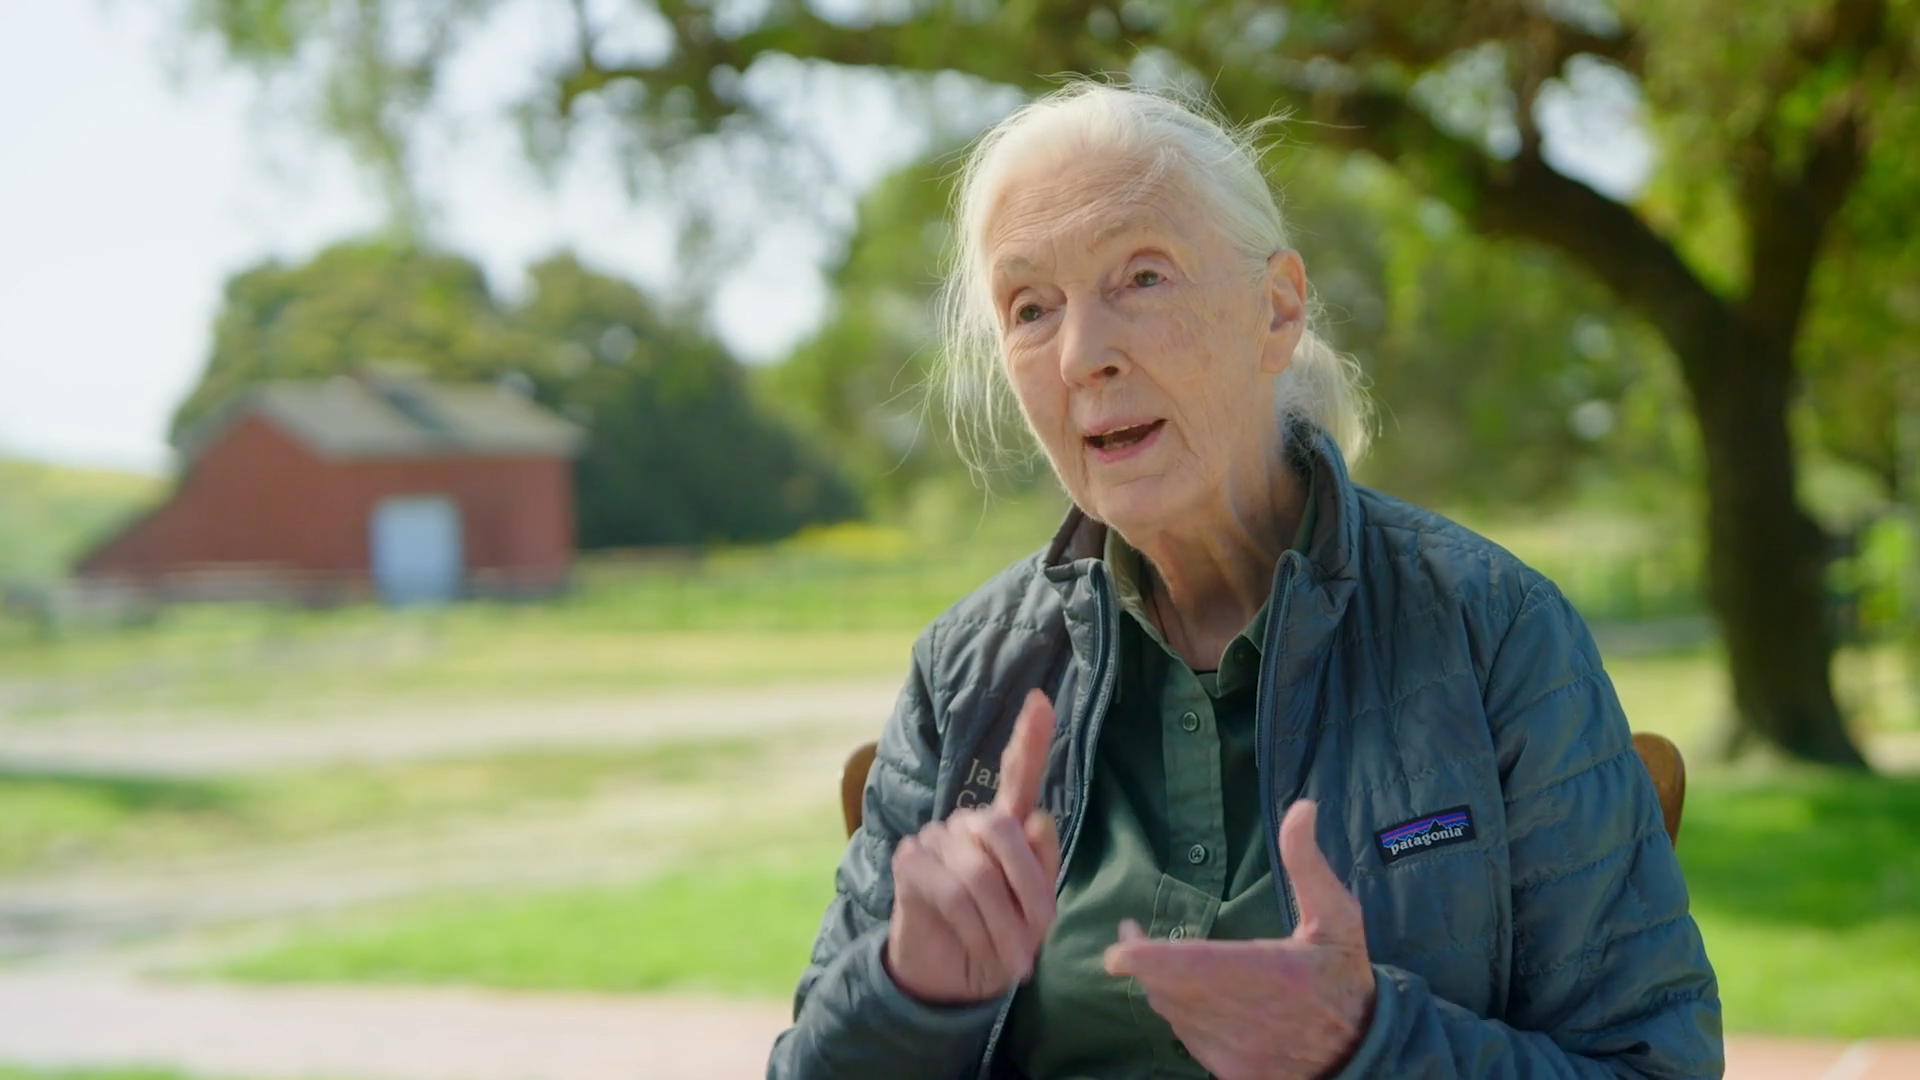  Jane Goodall wearing a green shirt and jacket, seated in a sunlit meadow gesturing as she speaks to an unseen person